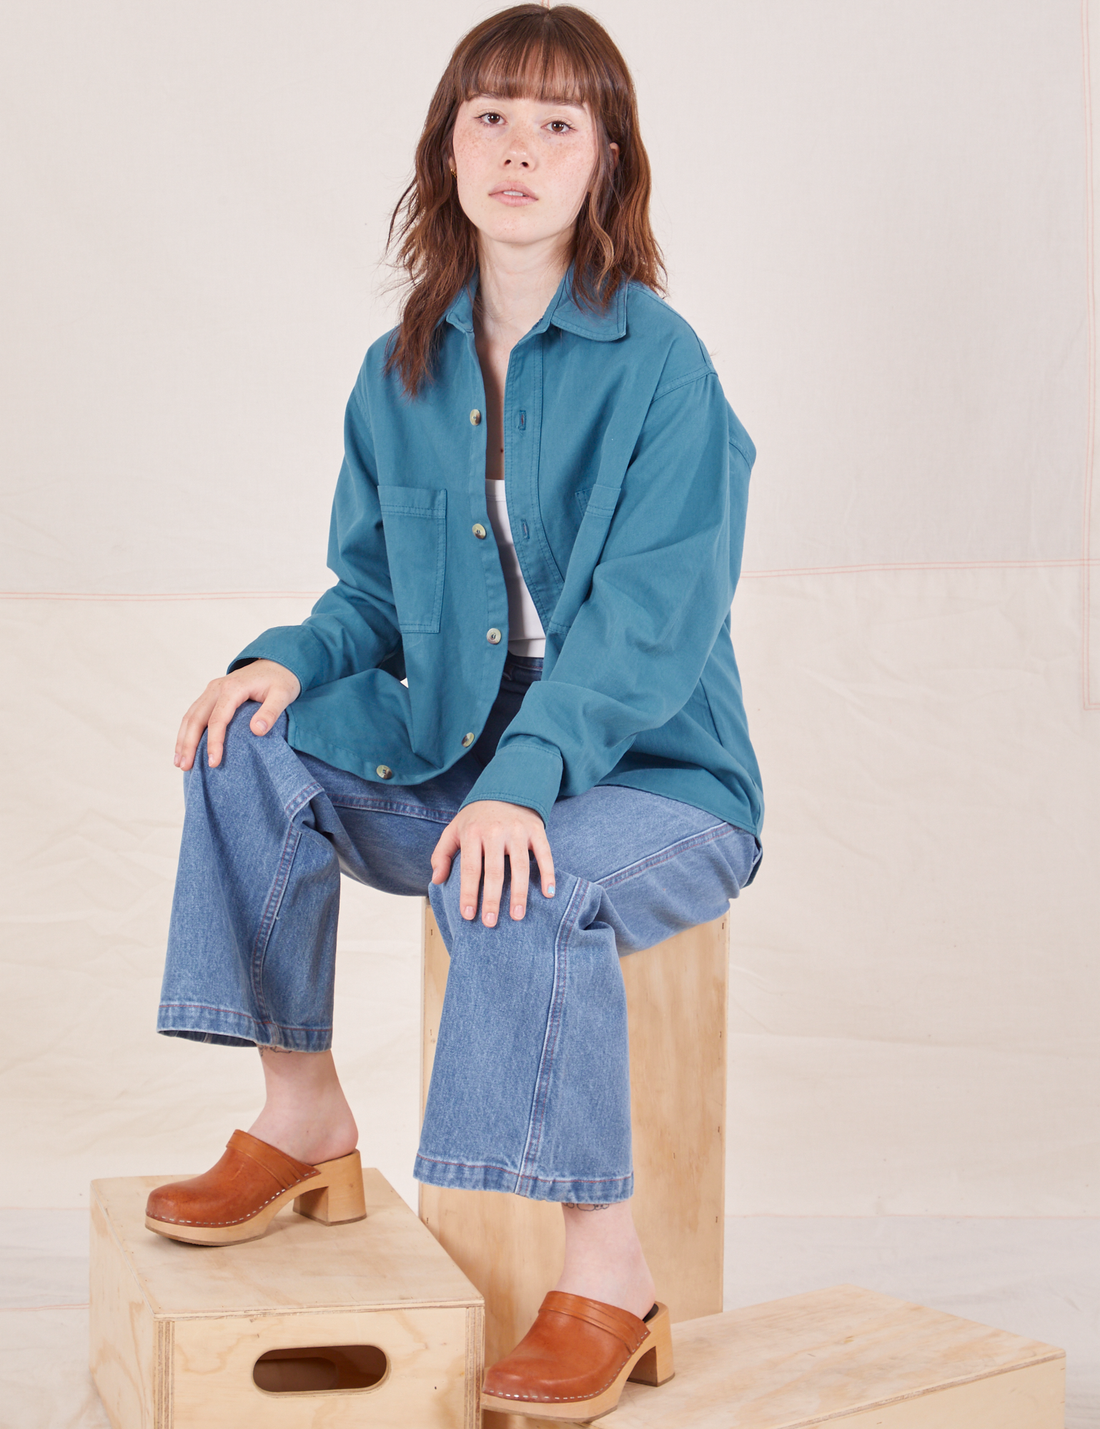 Hana is sitting on a wooden crate wearing Oversize Overshirt in Marine Blue